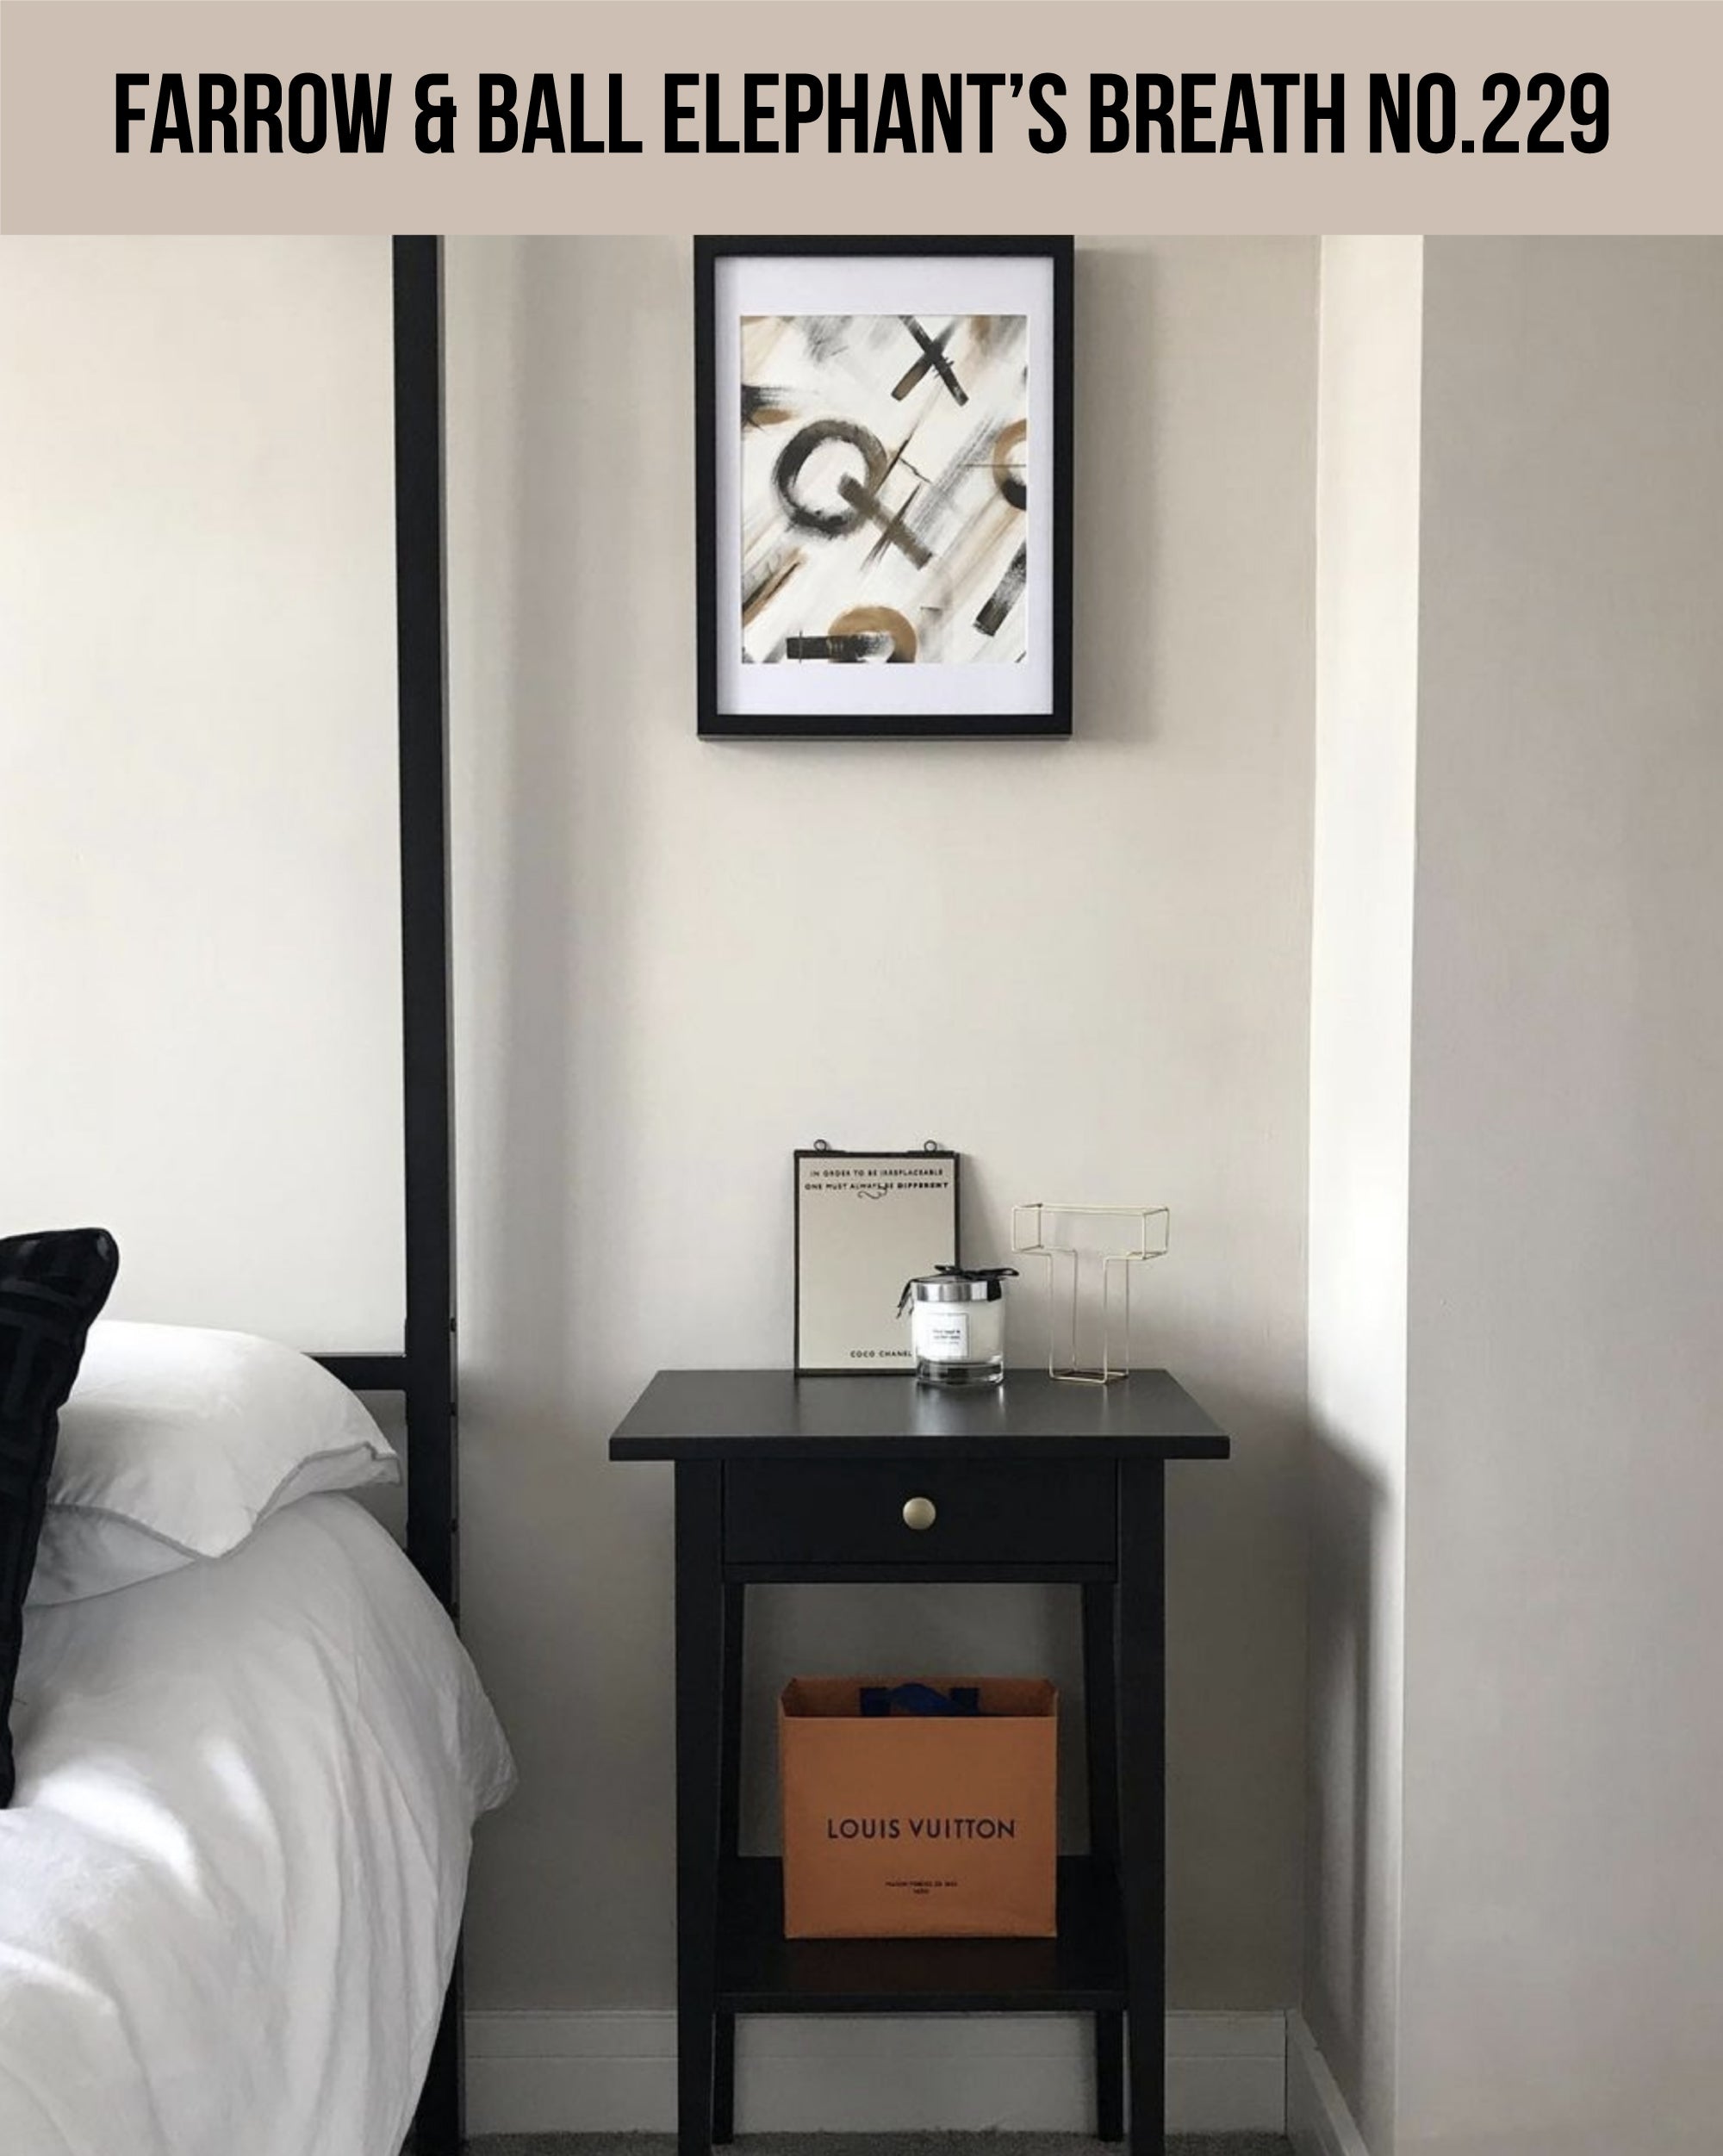 A black end table with a picture on the wall (Farrow & Ball Elephant’s Breath No.229)